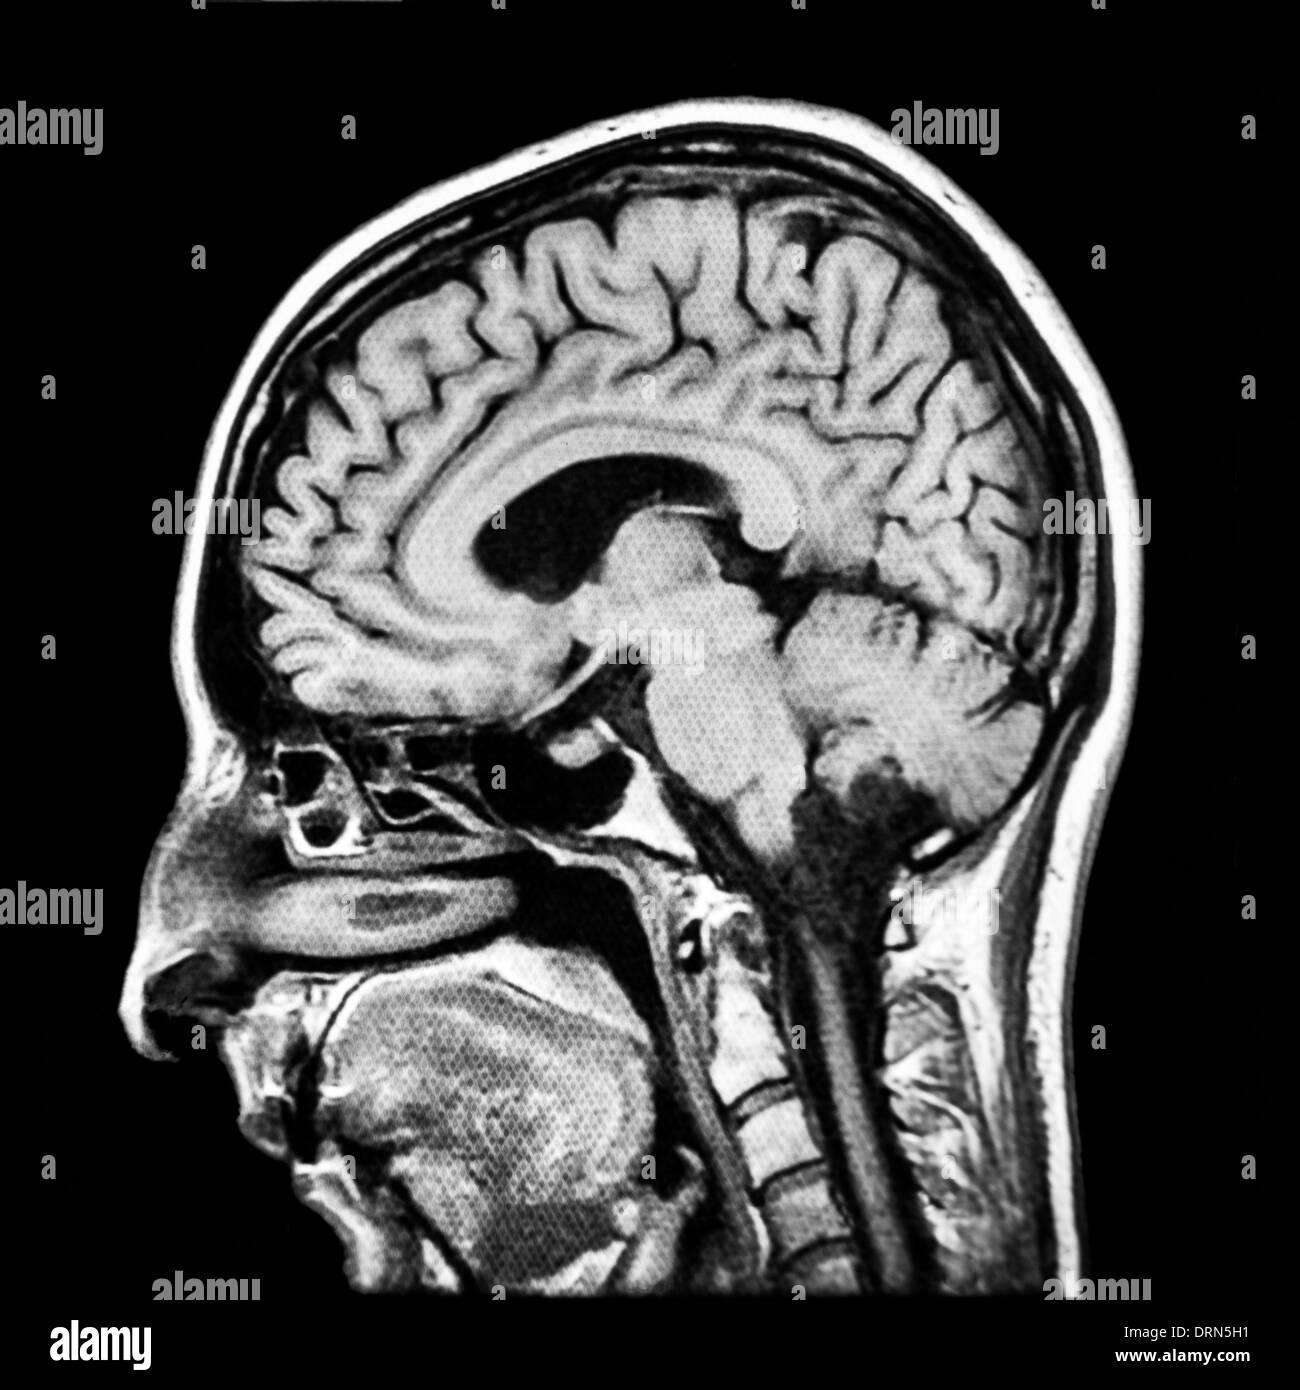 Vertical section of human brain MRI scan Stock Photo